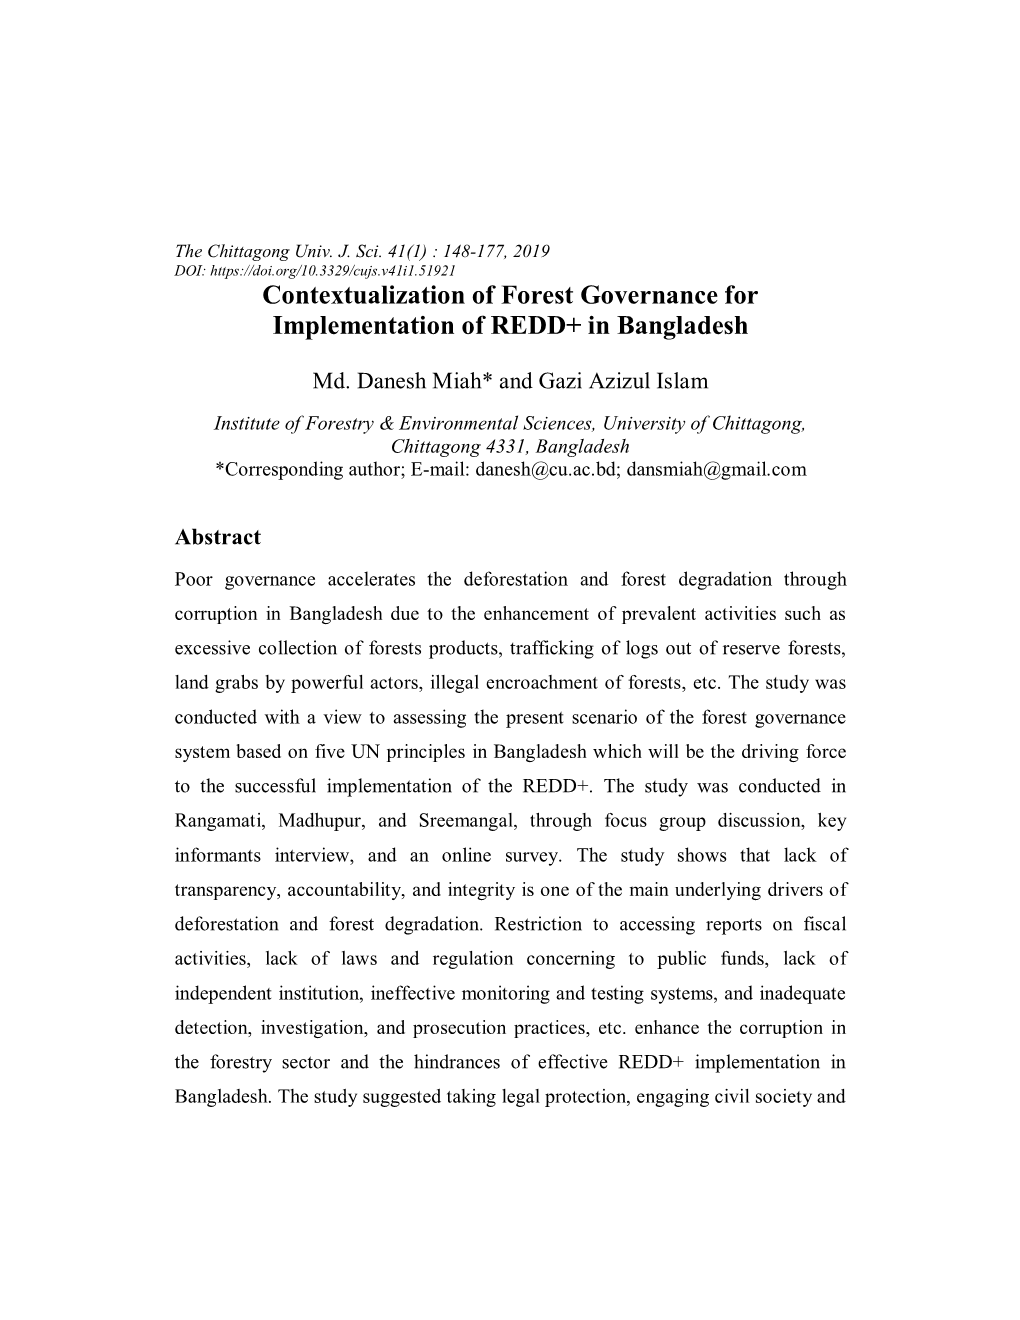 Contextualization of Forest Governance for Implementation of REDD+ in Bangladesh